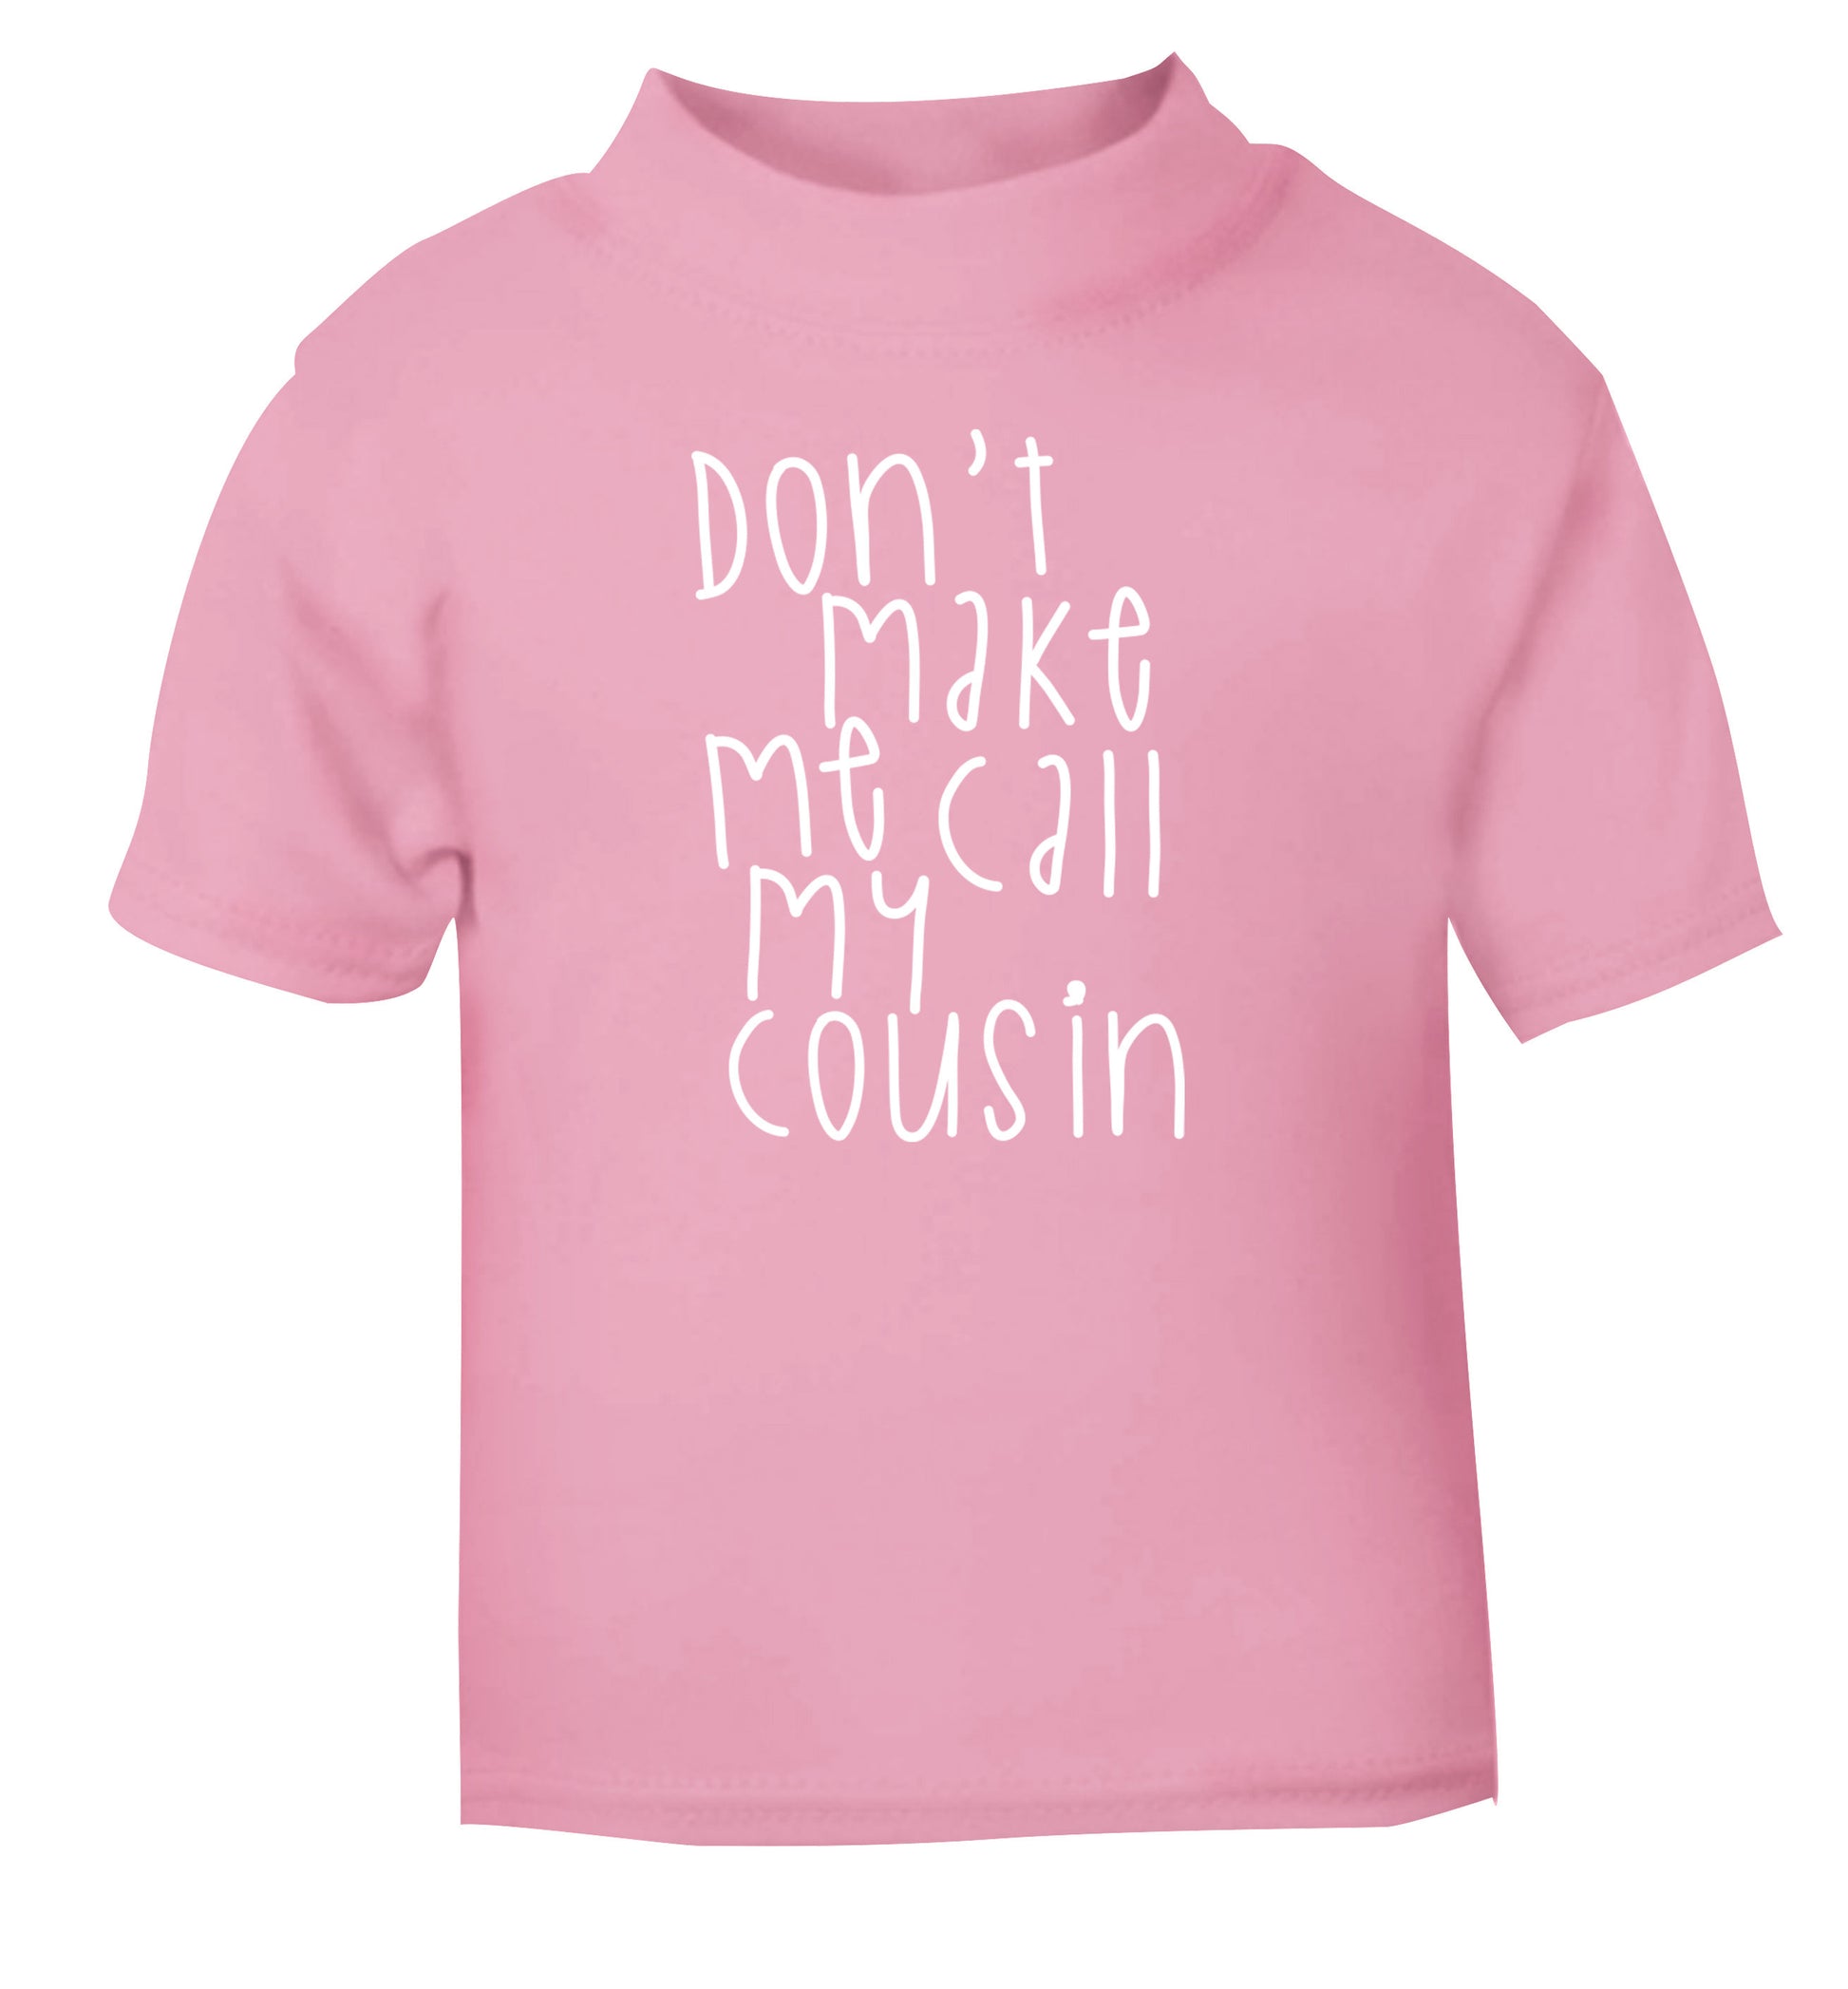 Don't make me call my cousin light pink Baby Toddler Tshirt 2 Years